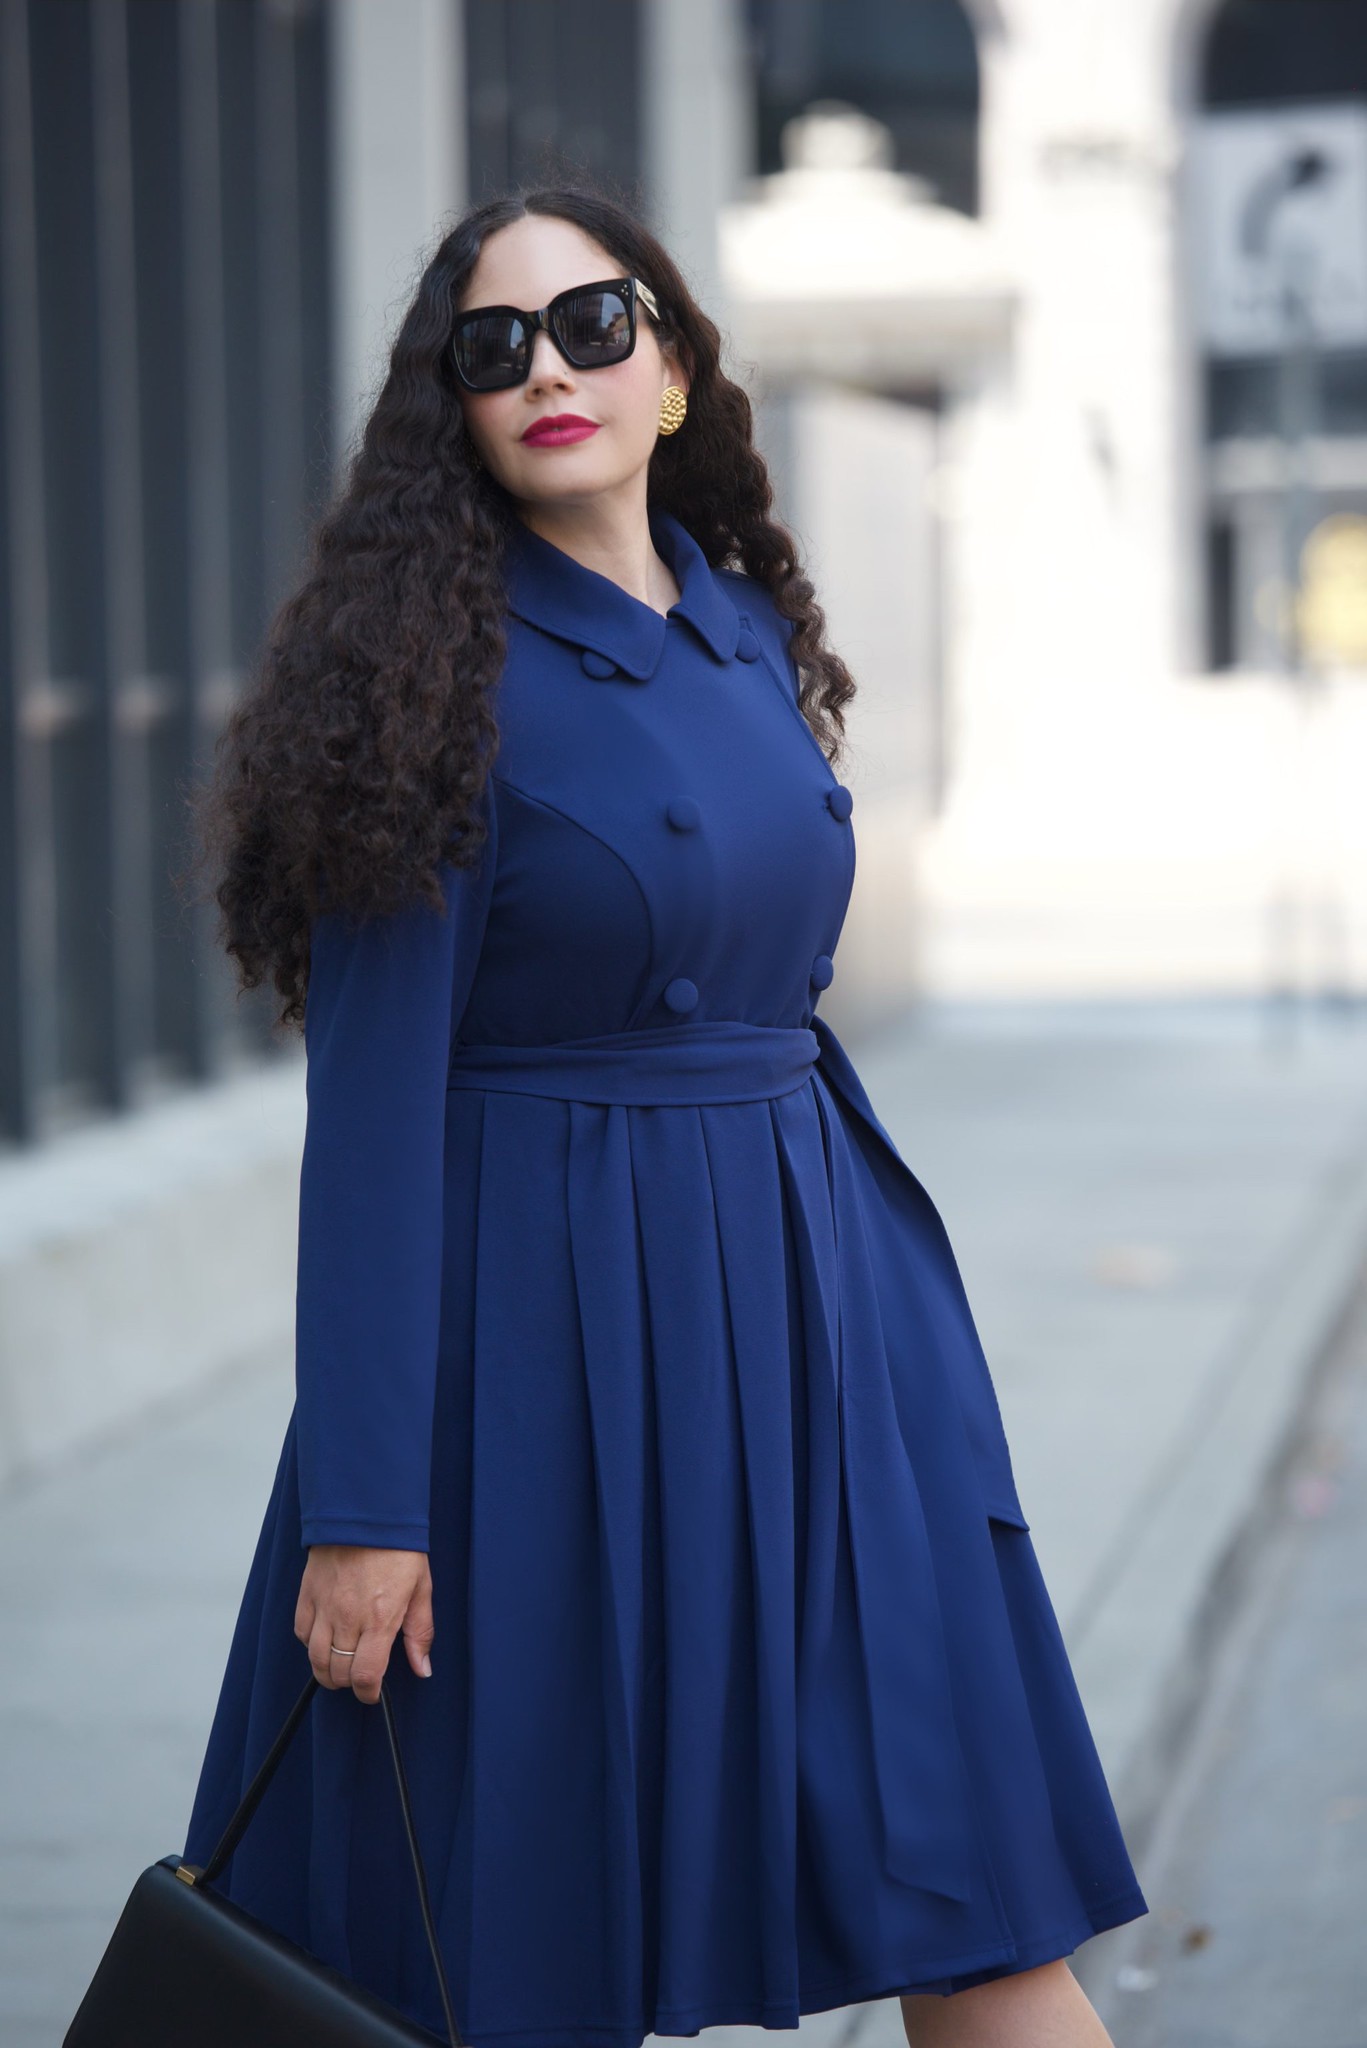 My All-Time Favorite Trench | Girl With Curves